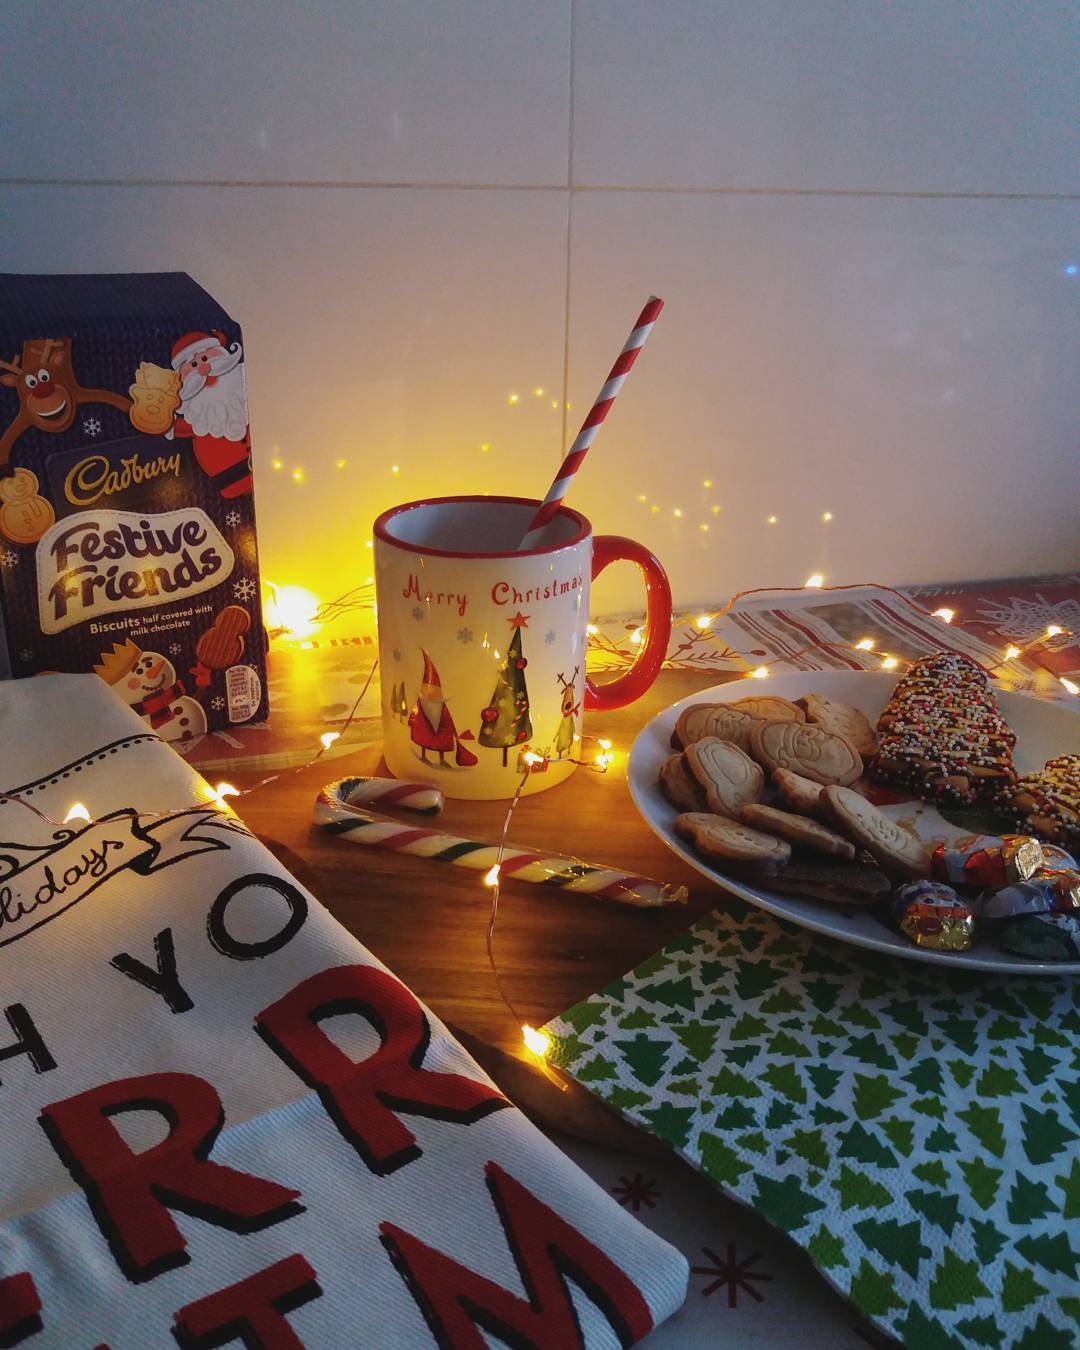 Leave the biscuits and tea ready for Santa and his little elfs helpers.